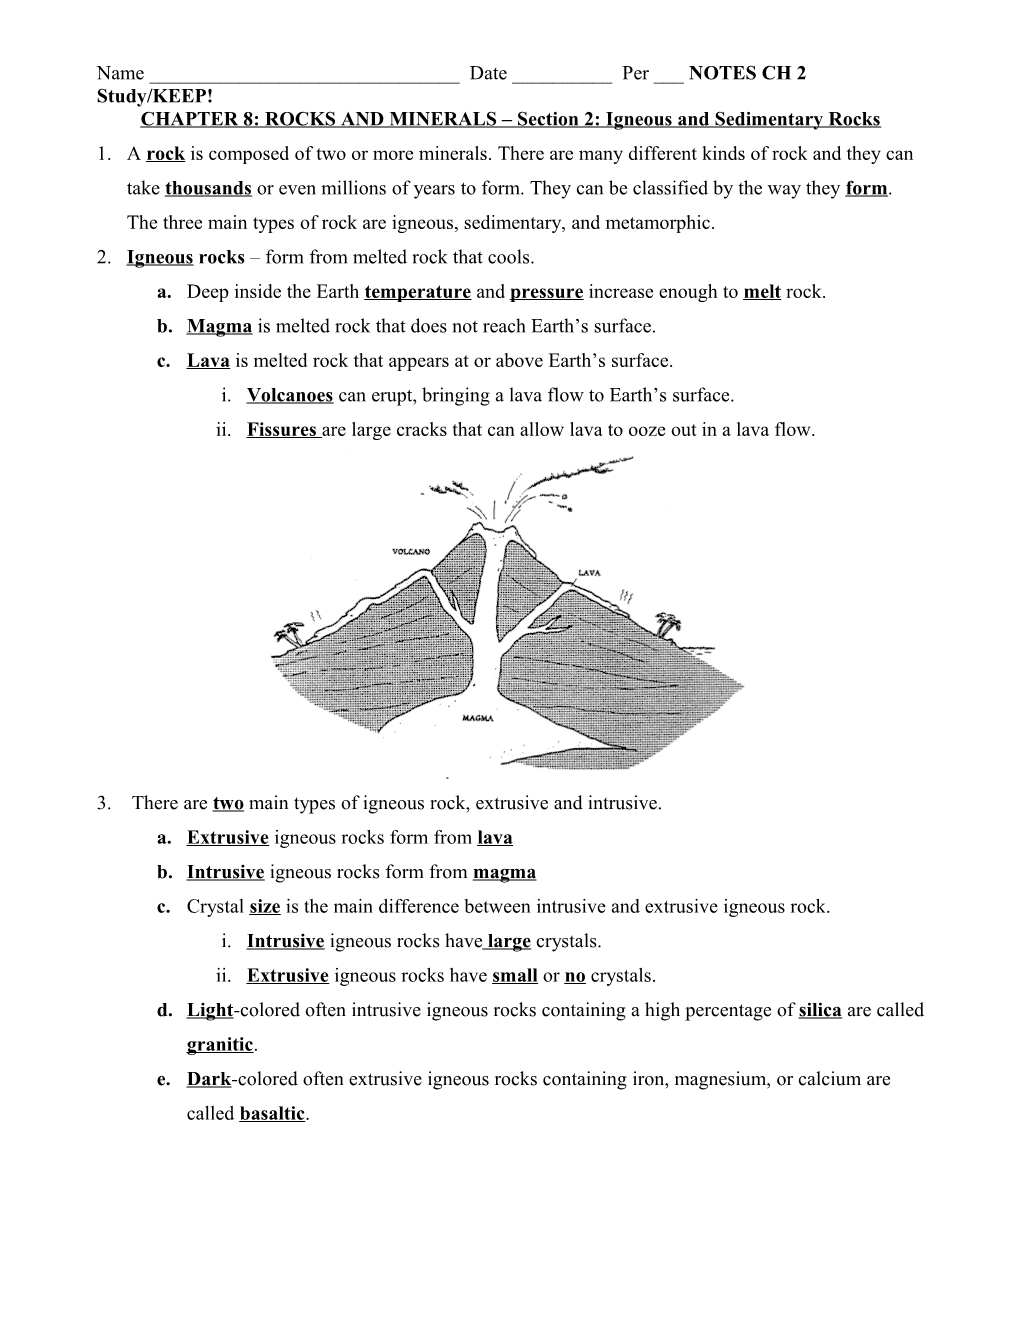 CHAPTER 8: ROCKS and MINERALS Section 2: Igneous and Sedimentary Rocks